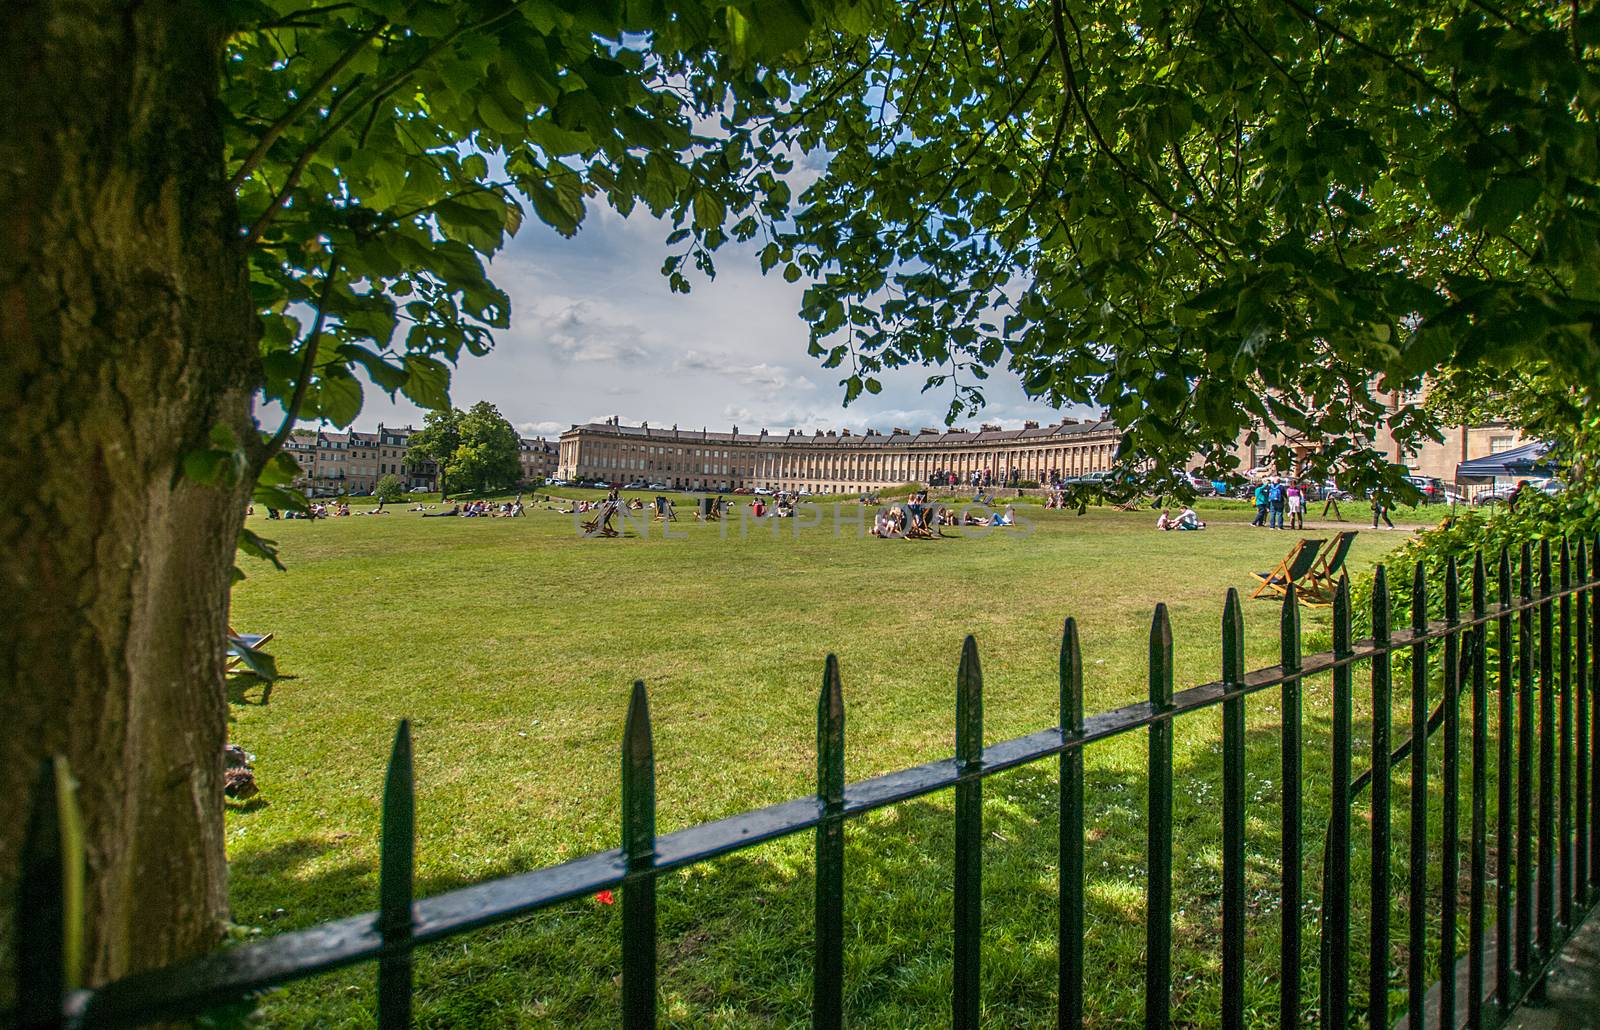 the royal crescent in bath by sirspread